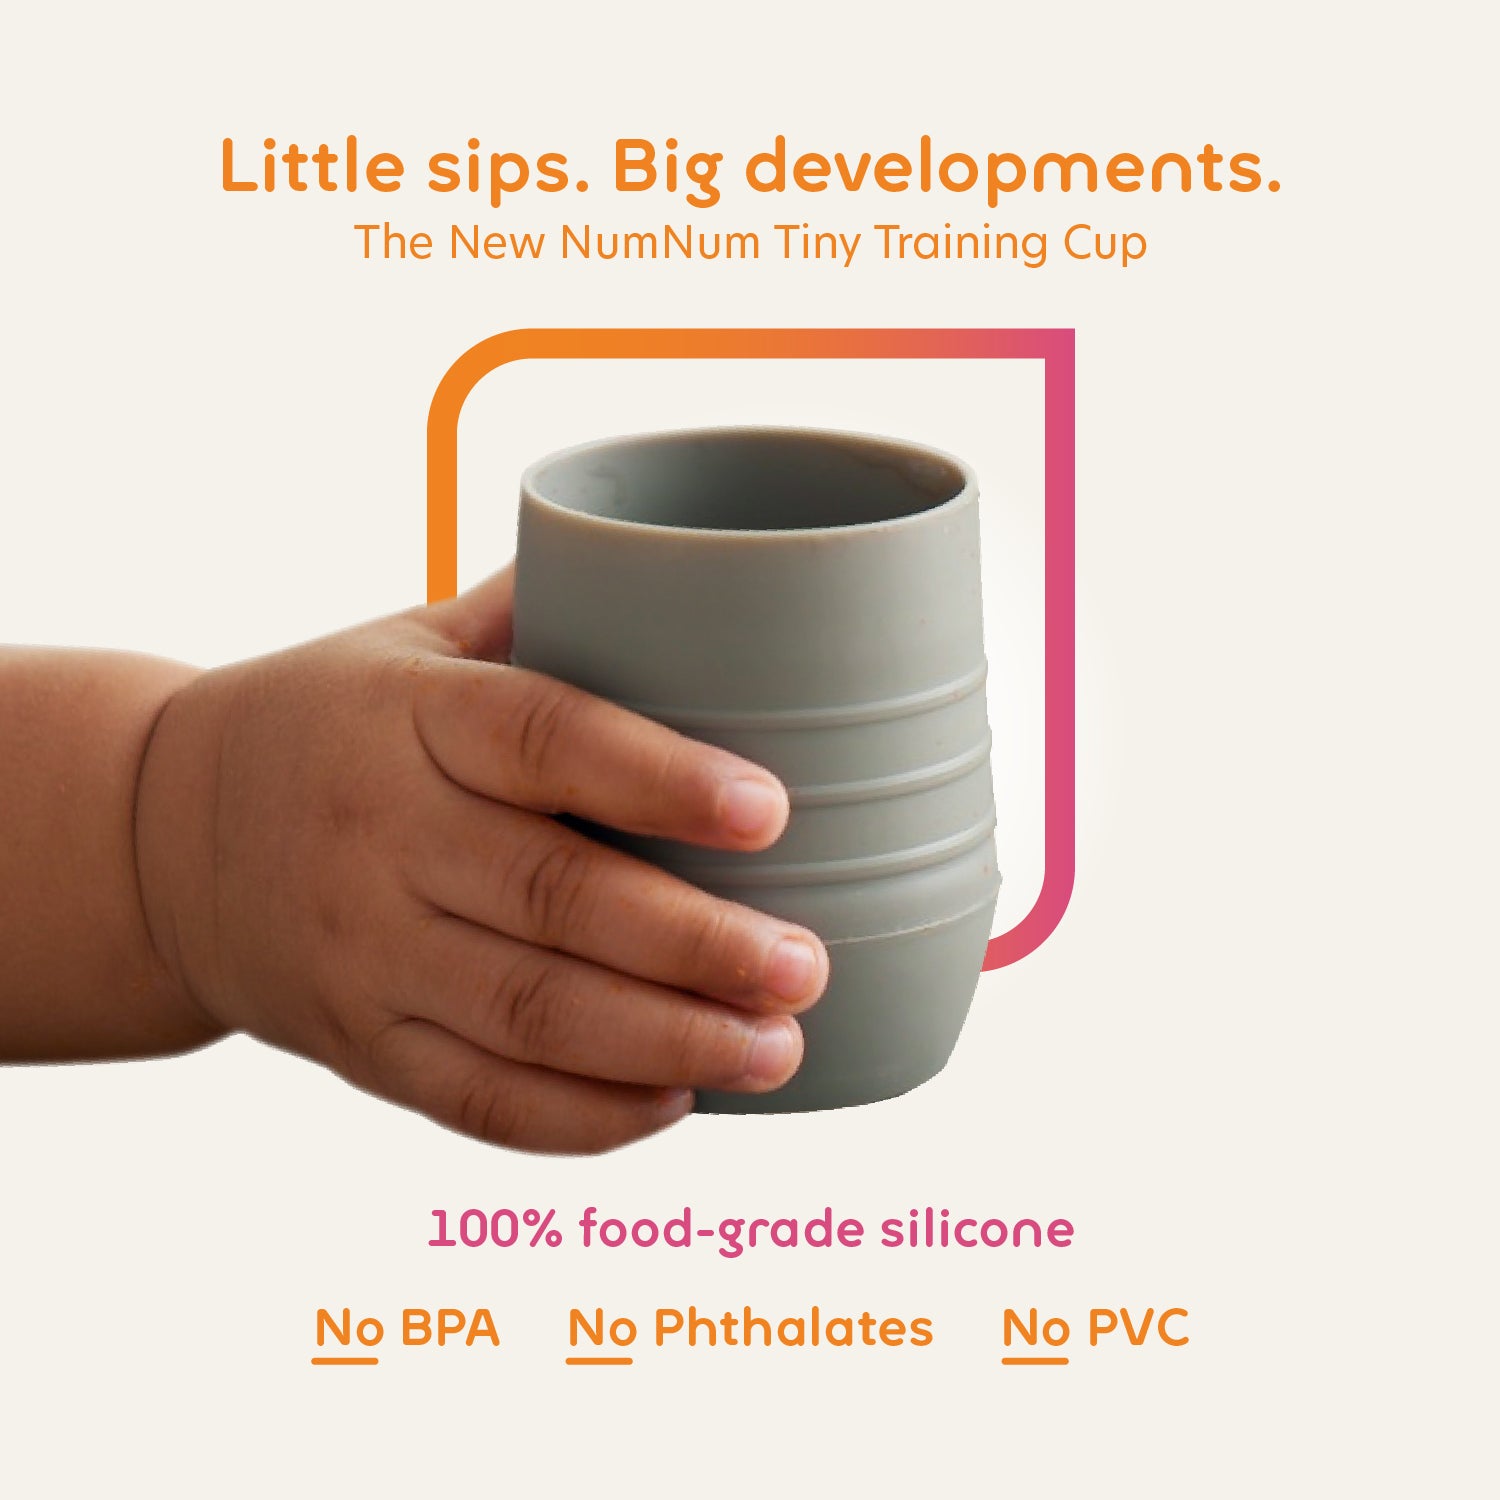 Tiny Training Cup